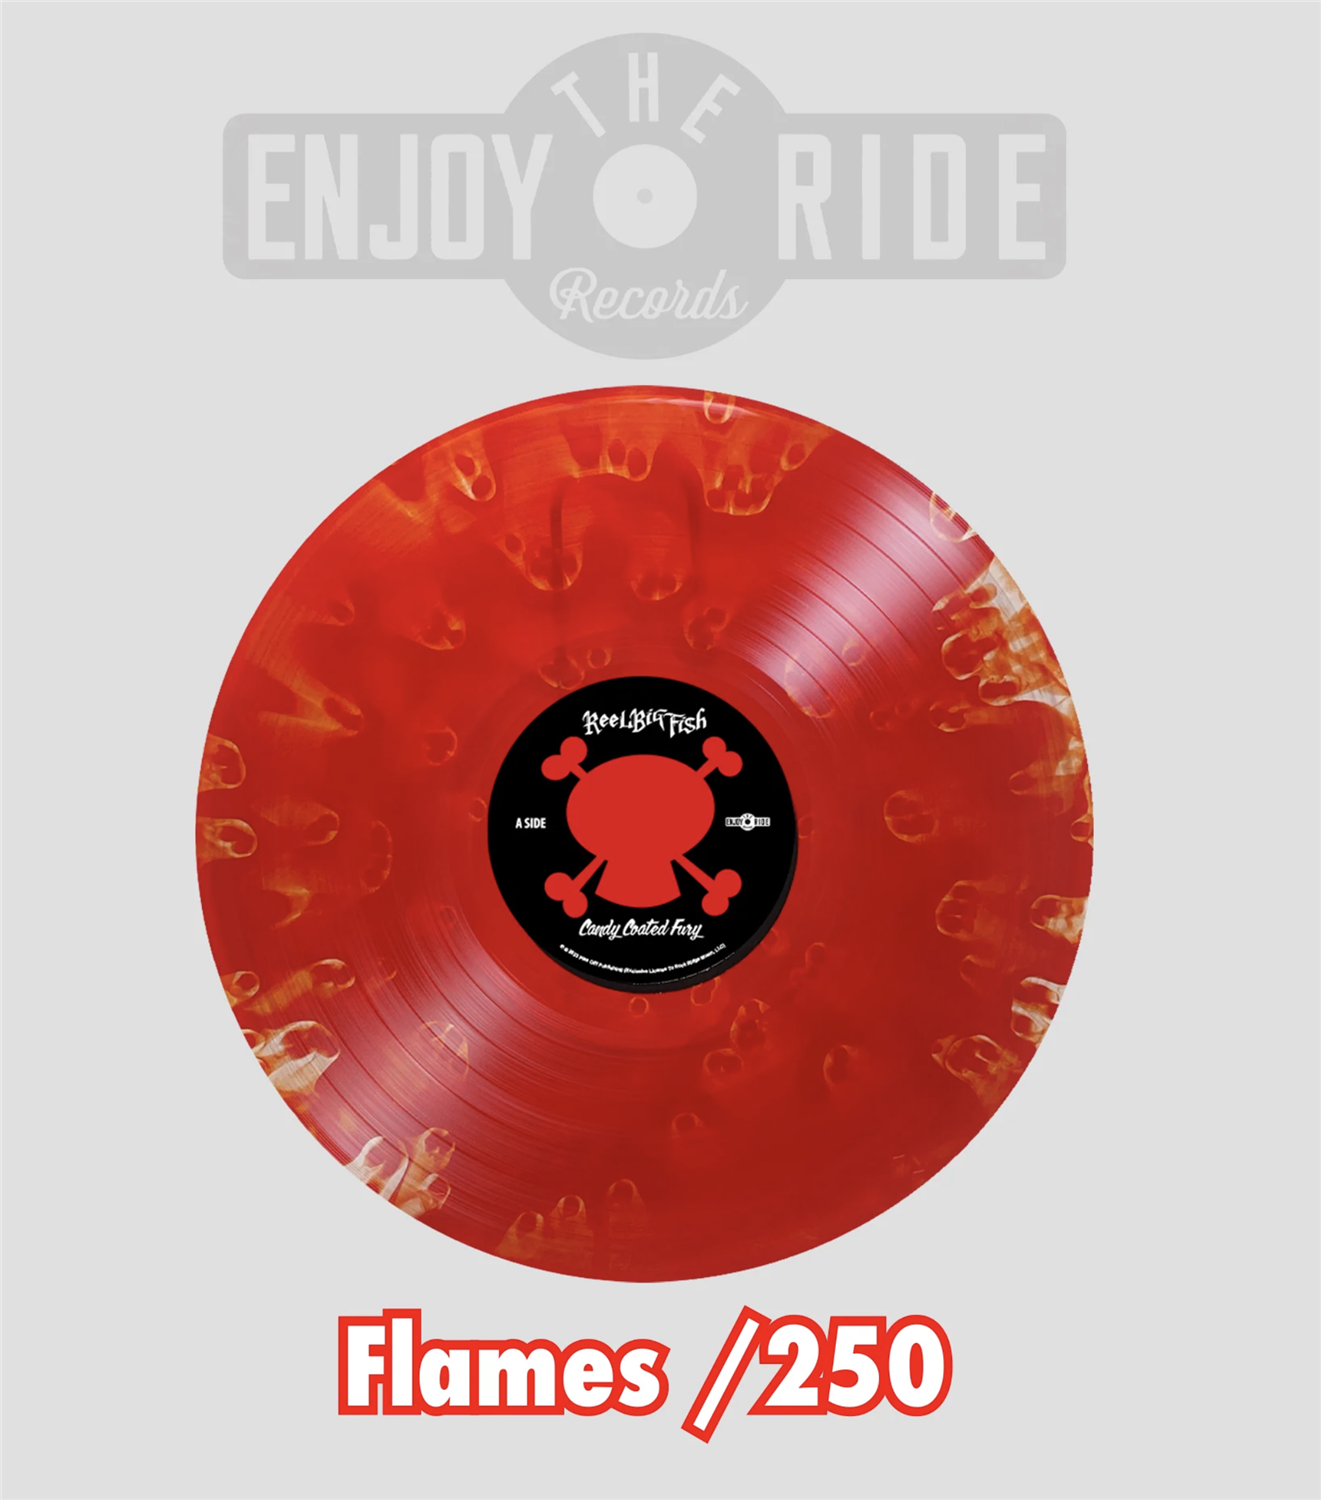 Candy Coated Fury (Deluxe Edition) vinyl - flame variant